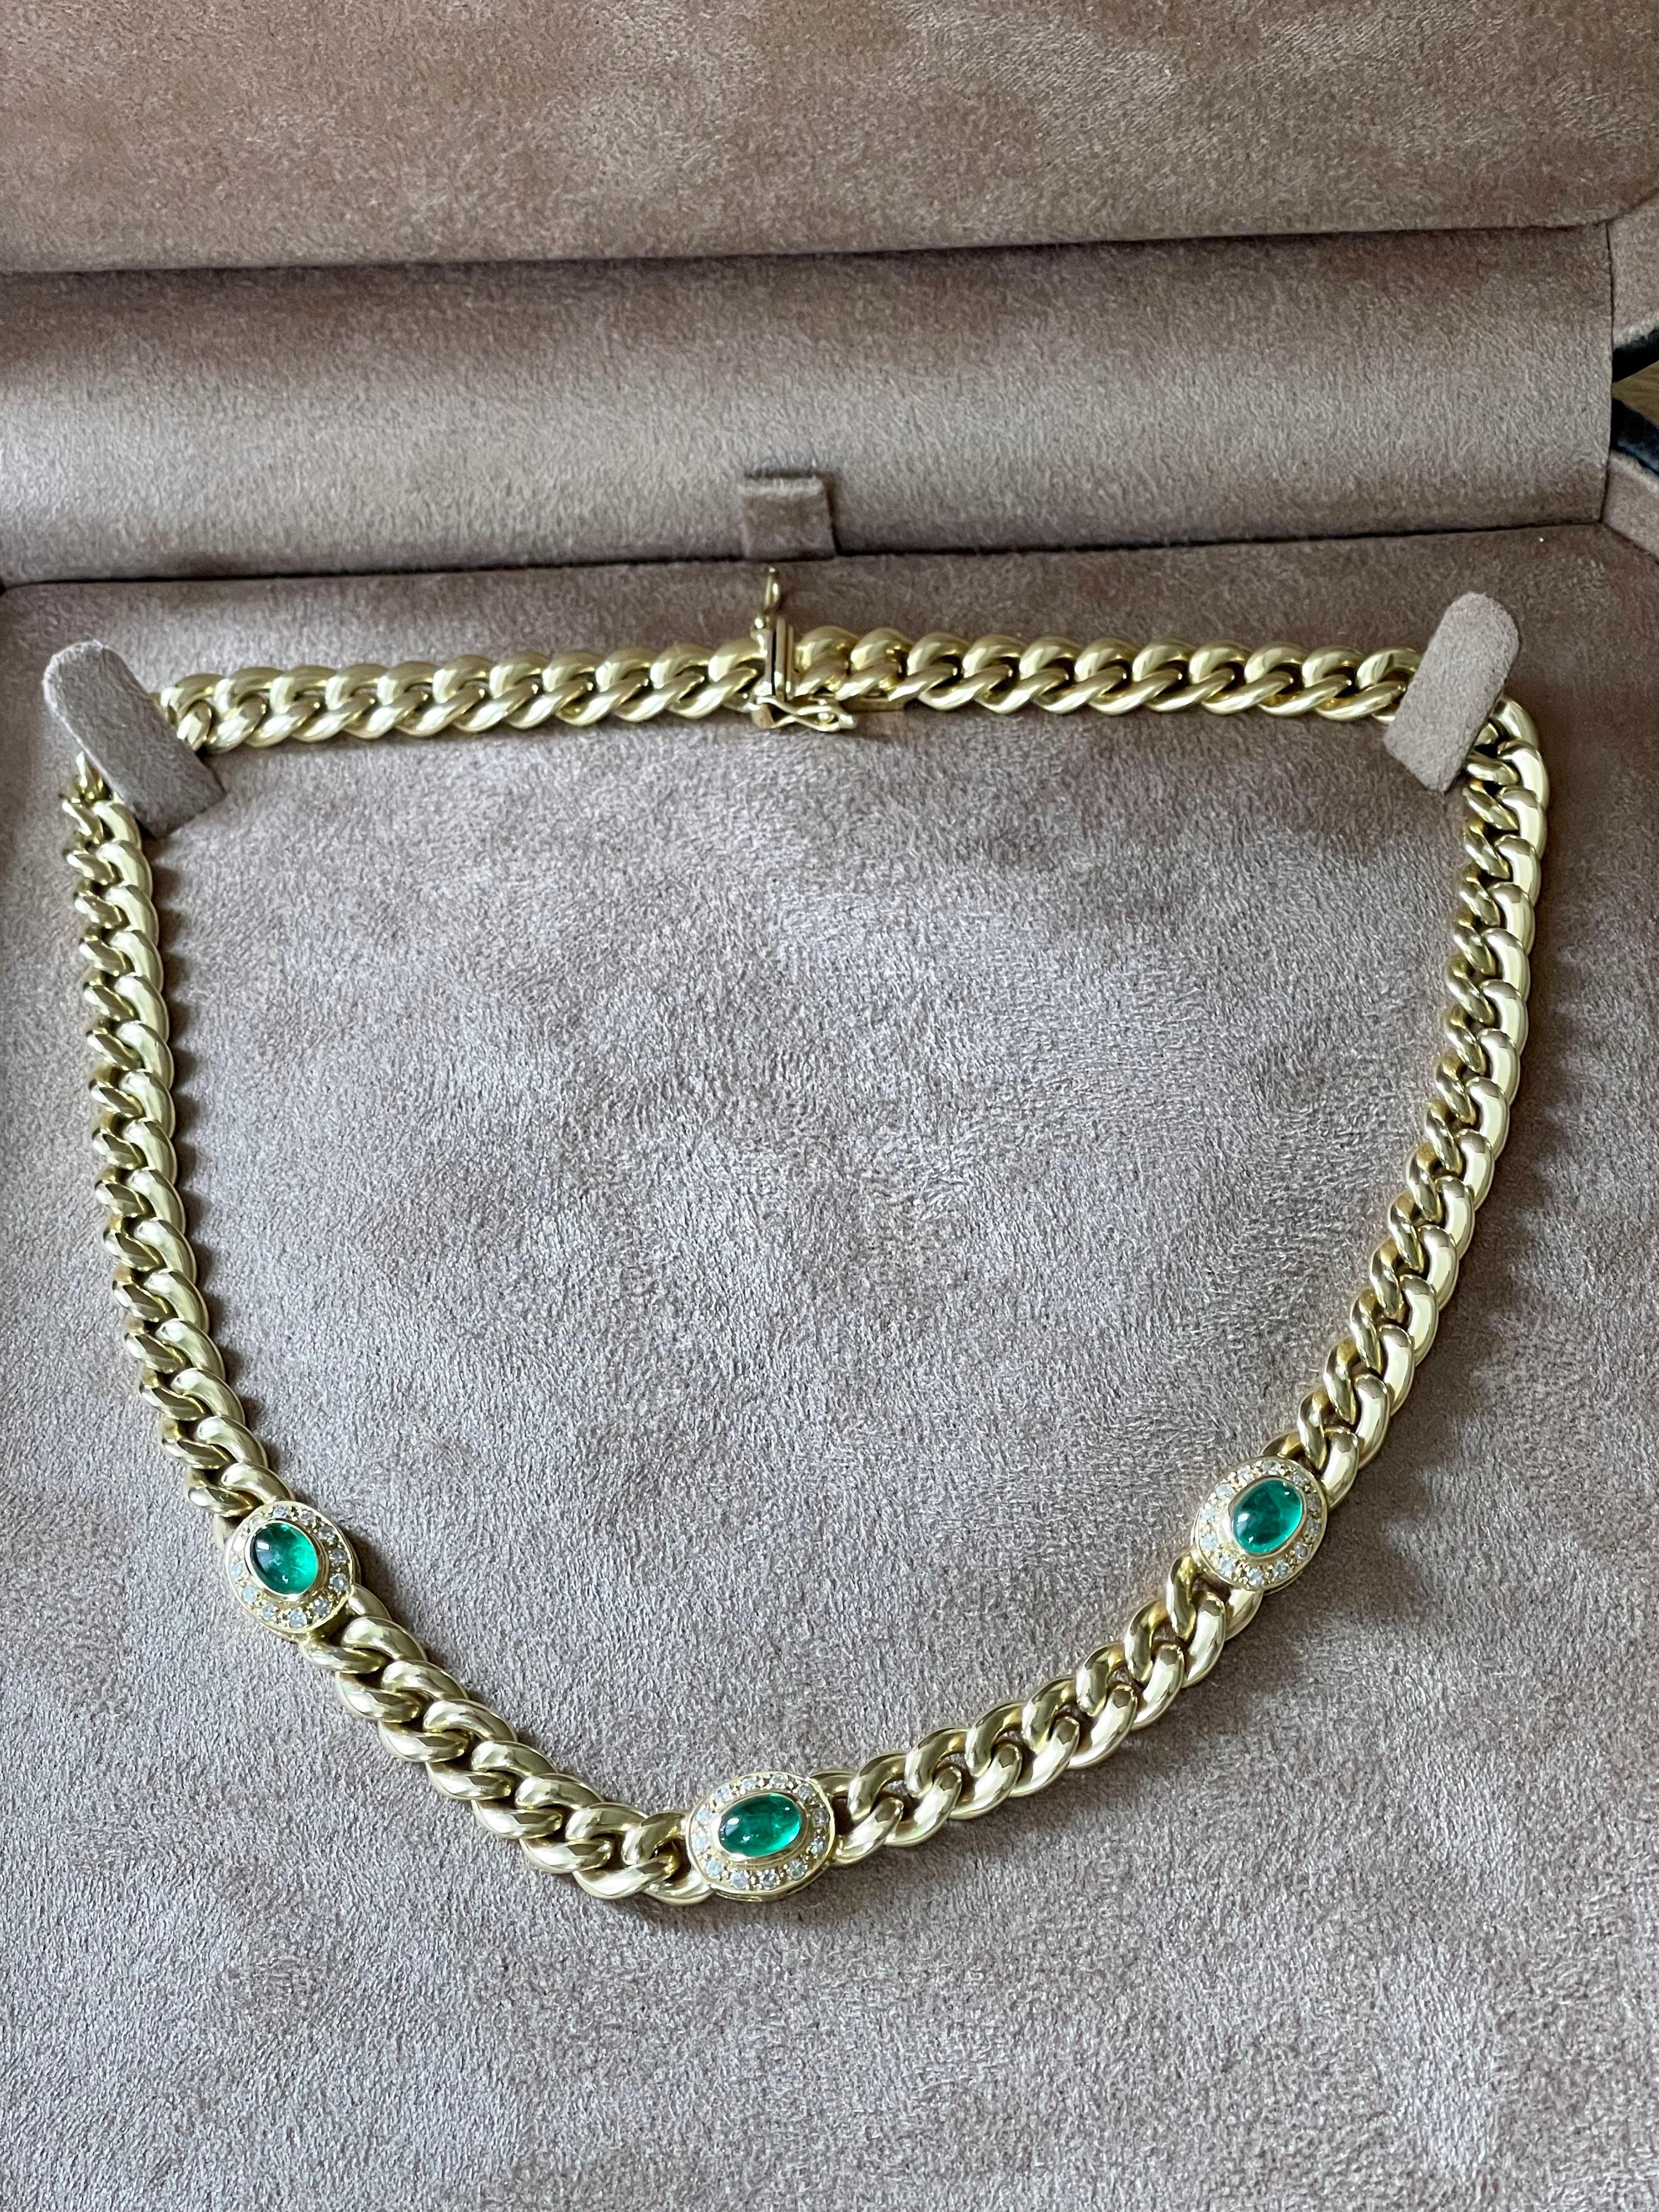 18 Karat Gold Twisted Curb Chain Necklace Emerald Cabochons Diamonds by Bucherer 6